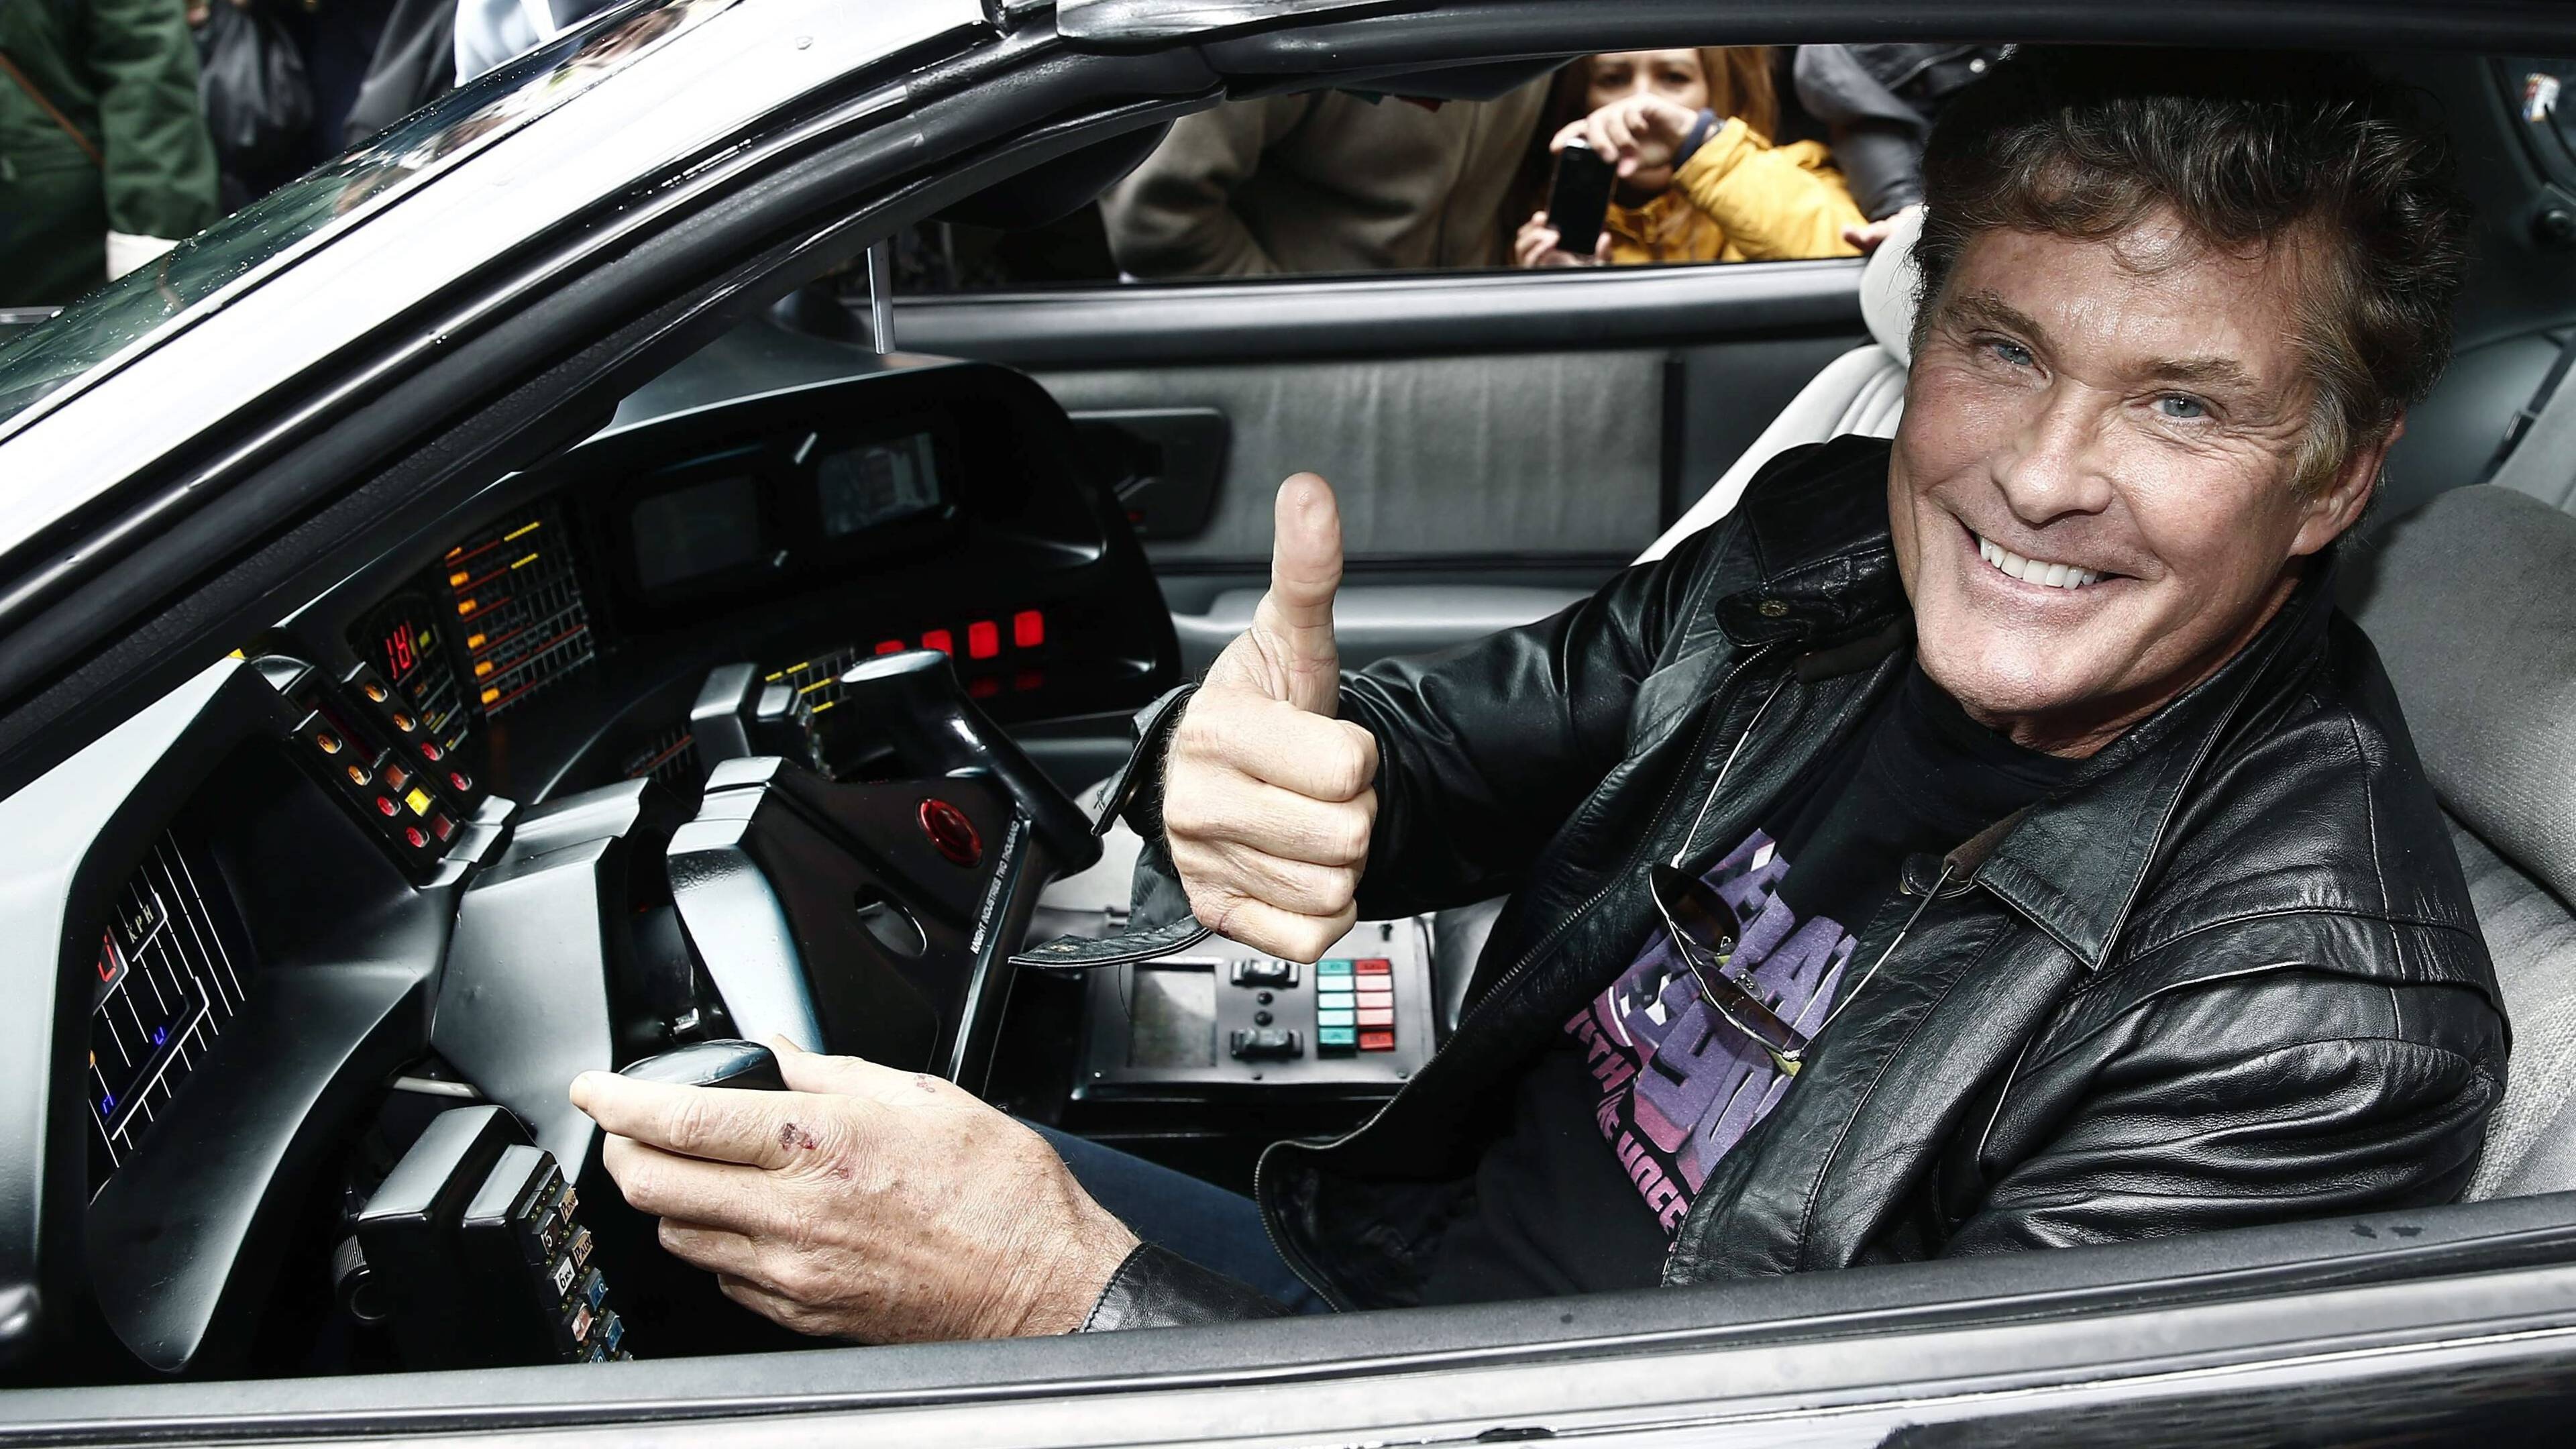 David Hasselhoff: Nicknamed "The Hoff", An American actor, singer, and television personality. 3840x2160 4K Background.